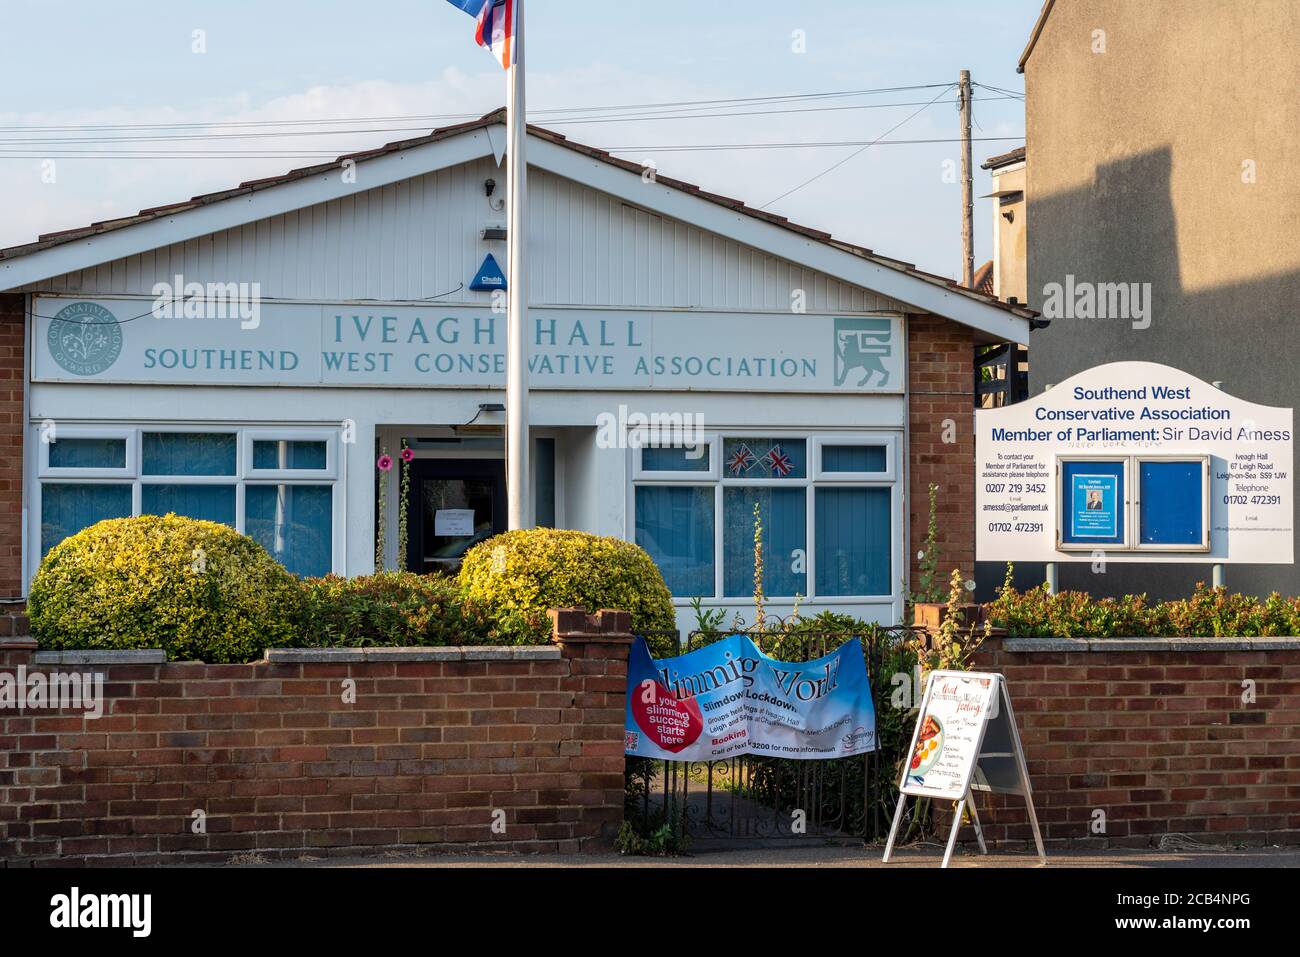 Southend West Conservative Association office, Iveagh Hall. Base of Tory Member of Parliament David Amess. Slimming World signs for adjacent hall Stock Photo